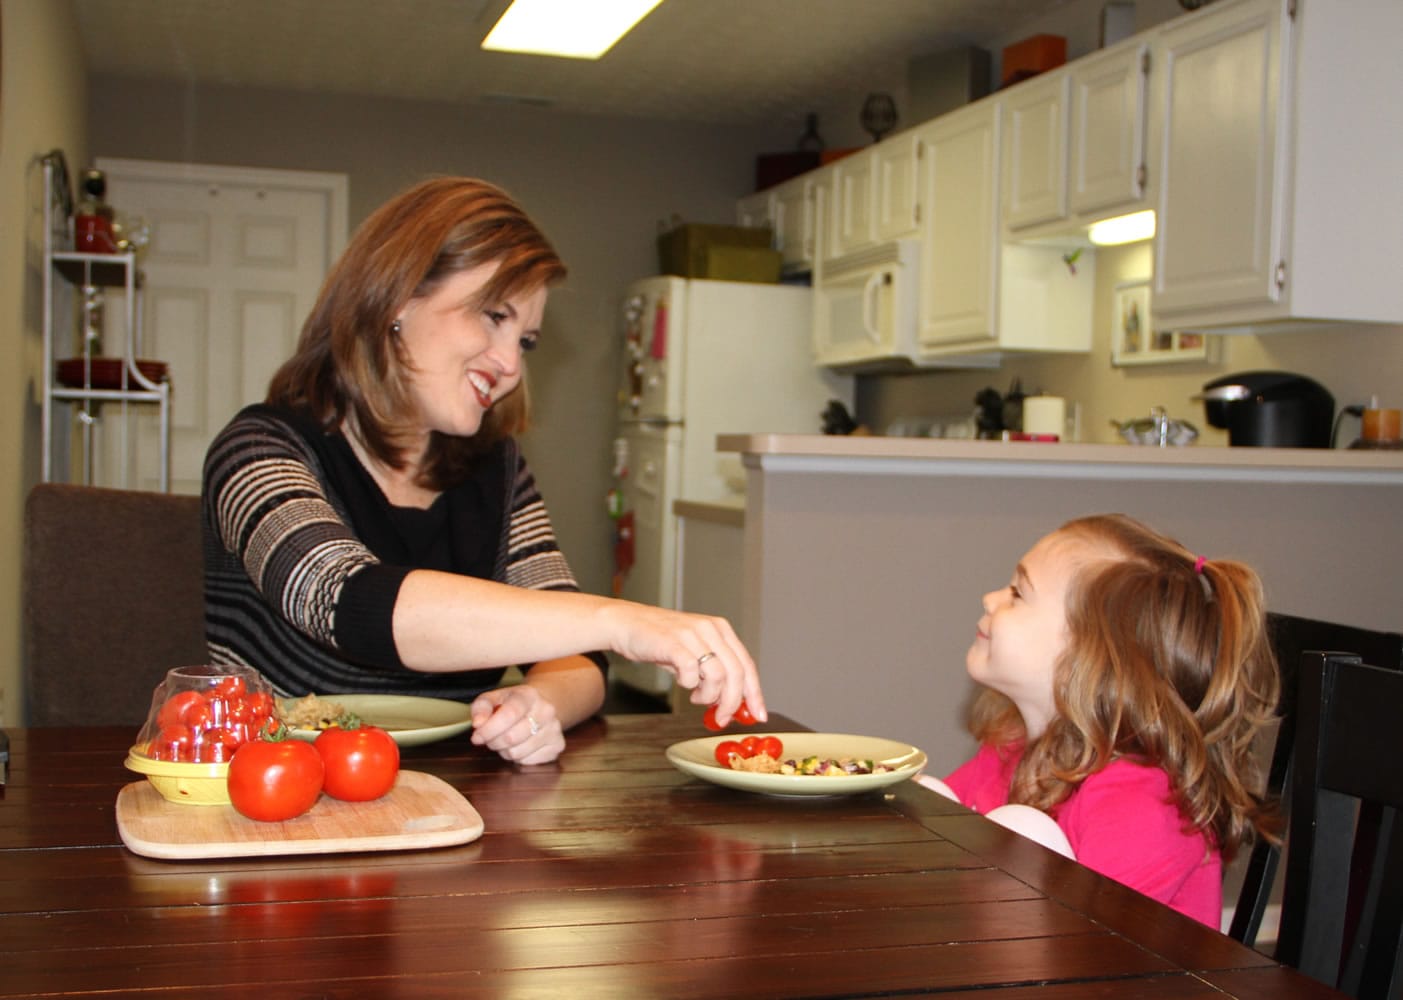 Shannon McCormick serves a tomato to her 4-year-old daughter, Sophie Chapman, at their home in Gahanna, Ohio.